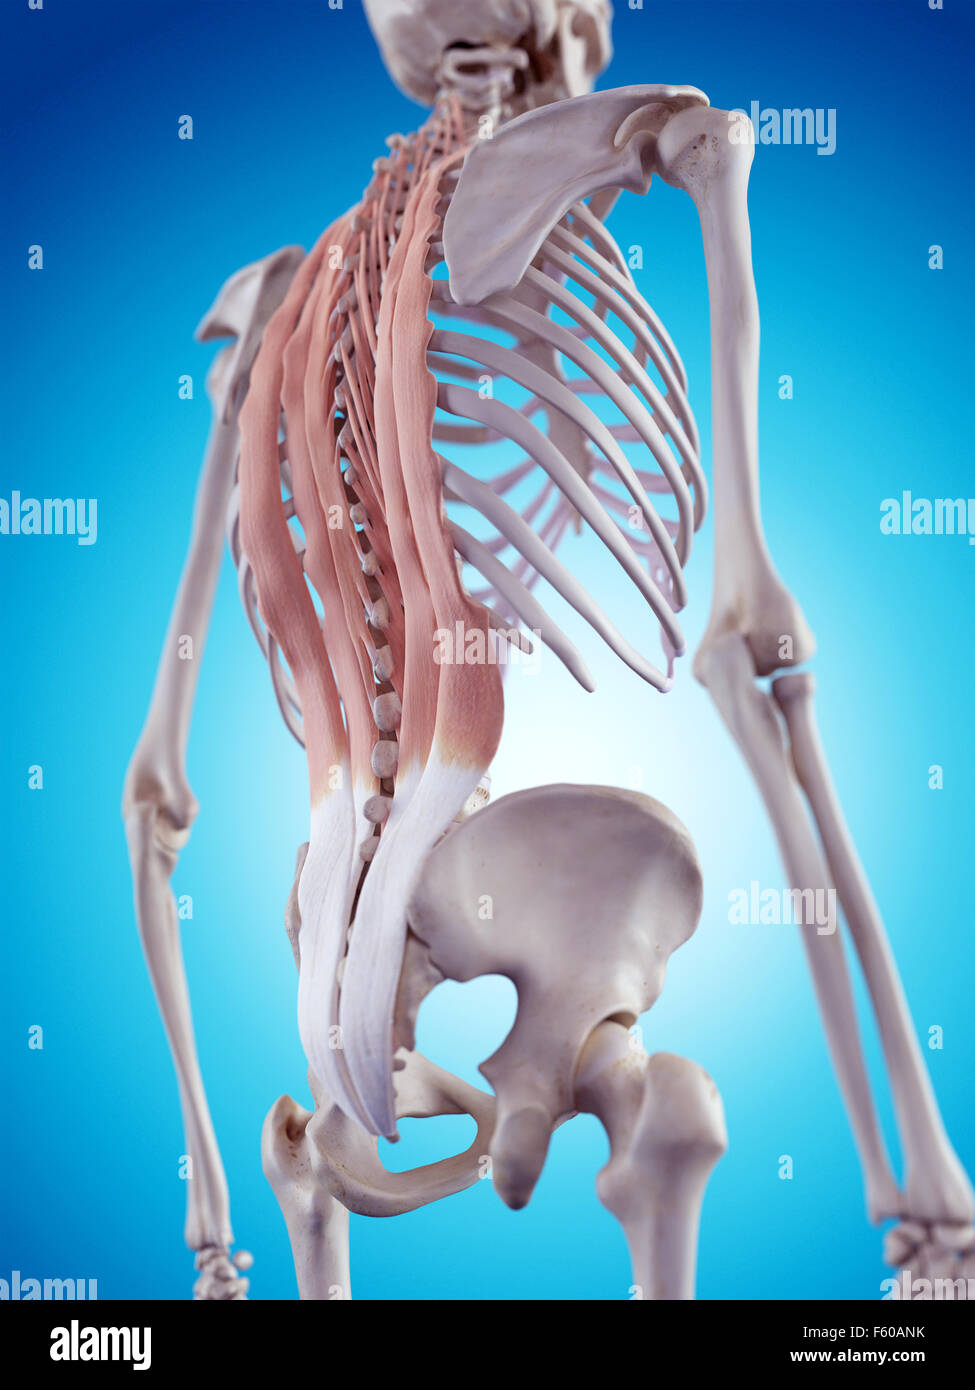 medically accurate illustration of the back muscles Stock Photo